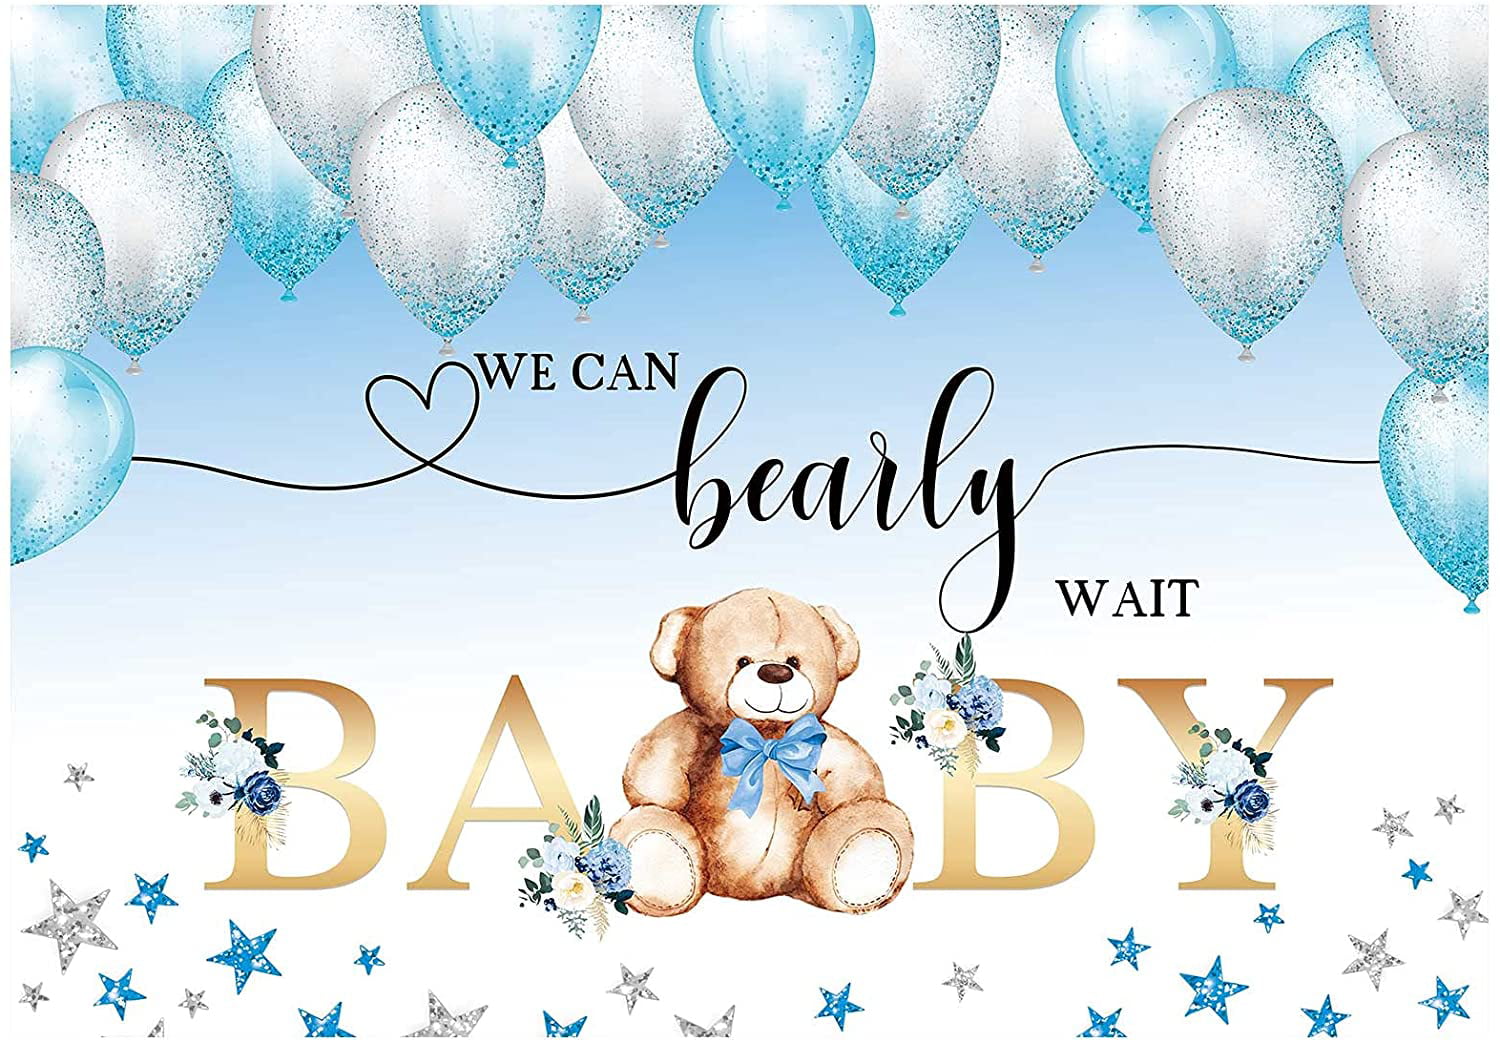 I agree to Margaret Mitchell So many Teddy Bear Baby Shower Table Sign Sanitizing Station Sign We Can Bearly  Wait Baby Shower Signs Blue Floral Boy Teddy Bear Baby Shower TB Paper &  Party Supplies Paper Invitations & Announcements